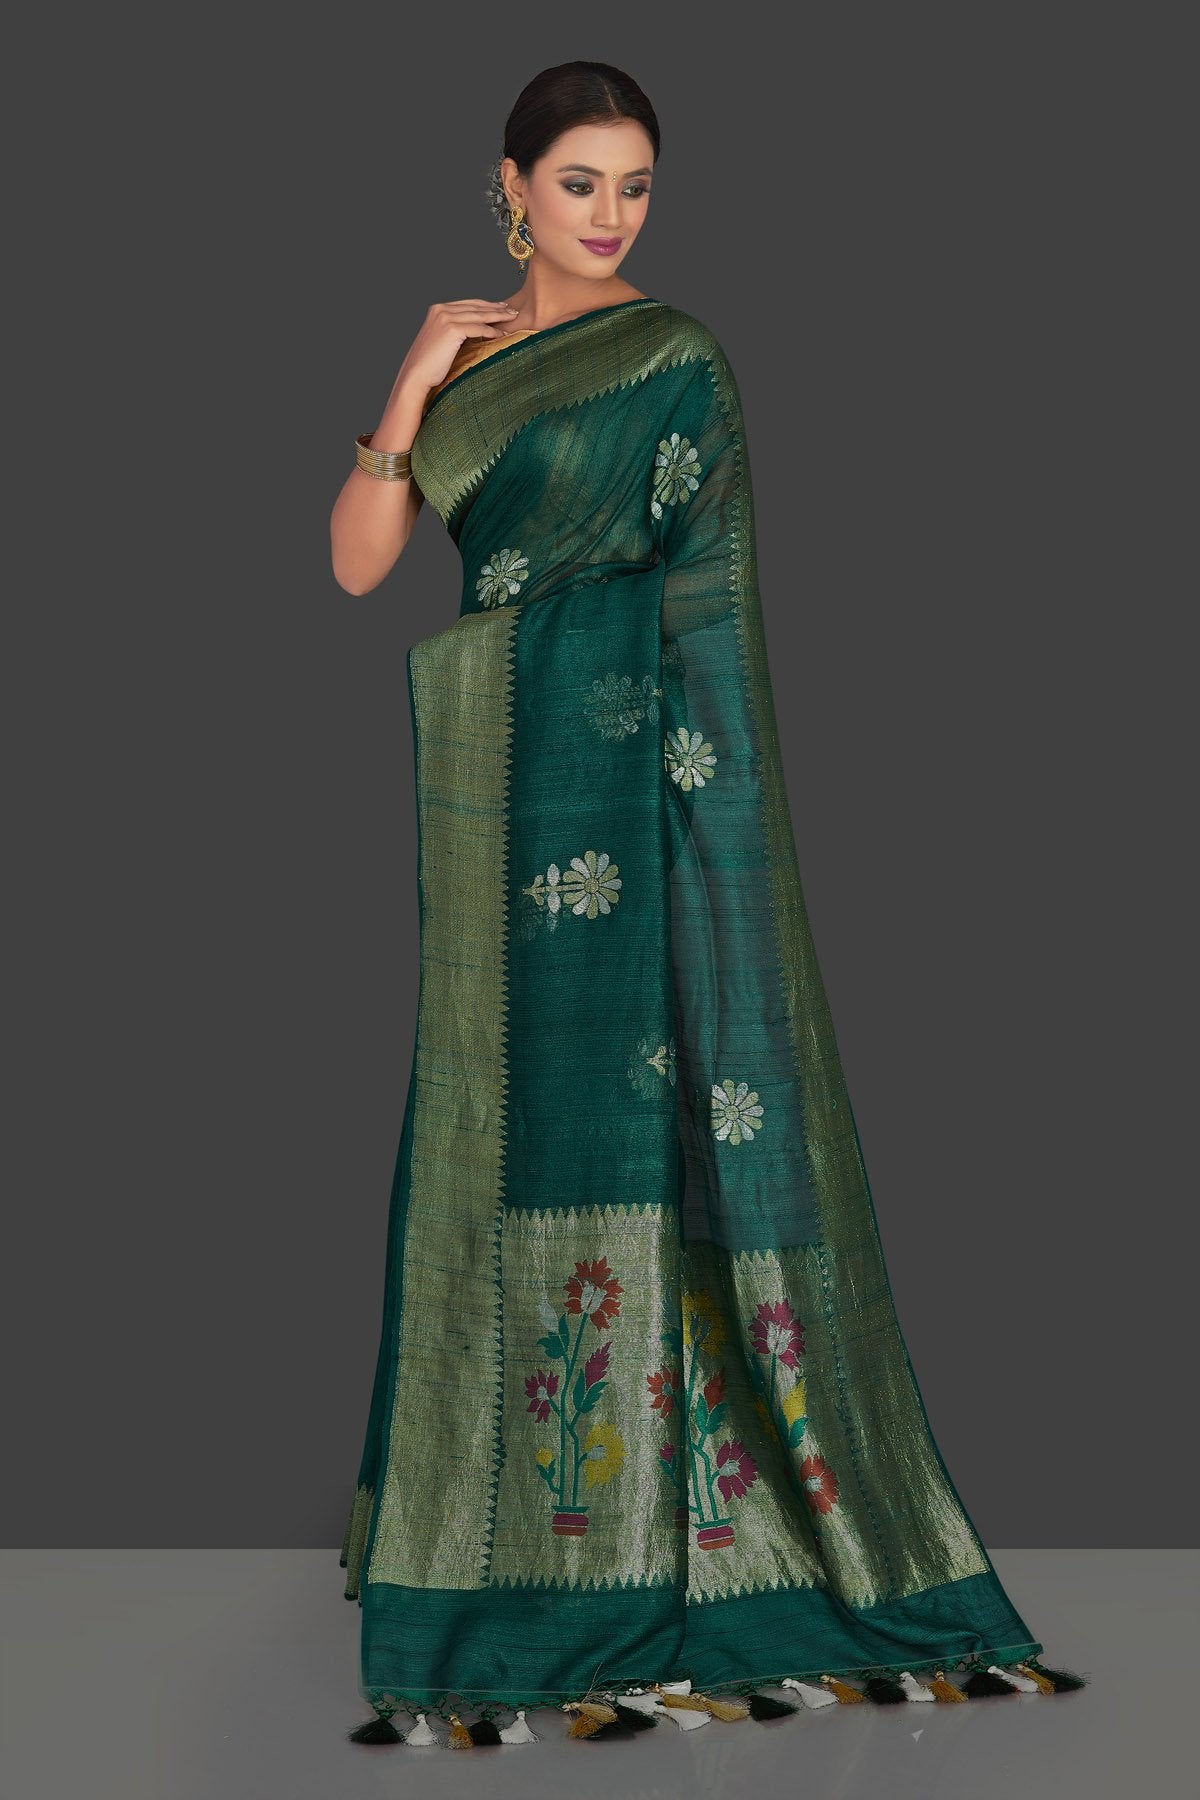 Buy elegant dark green tassar georgette Banarsi saree online in USA with flower buta. Radiate elegance with georgette sarees, Banarasi sarees, handwoven sarees from Pure Elegance Indian fashion boutique in USA. We bring a especially curated collection of ethnic sarees for Indian women in USA under one roof!-pallu